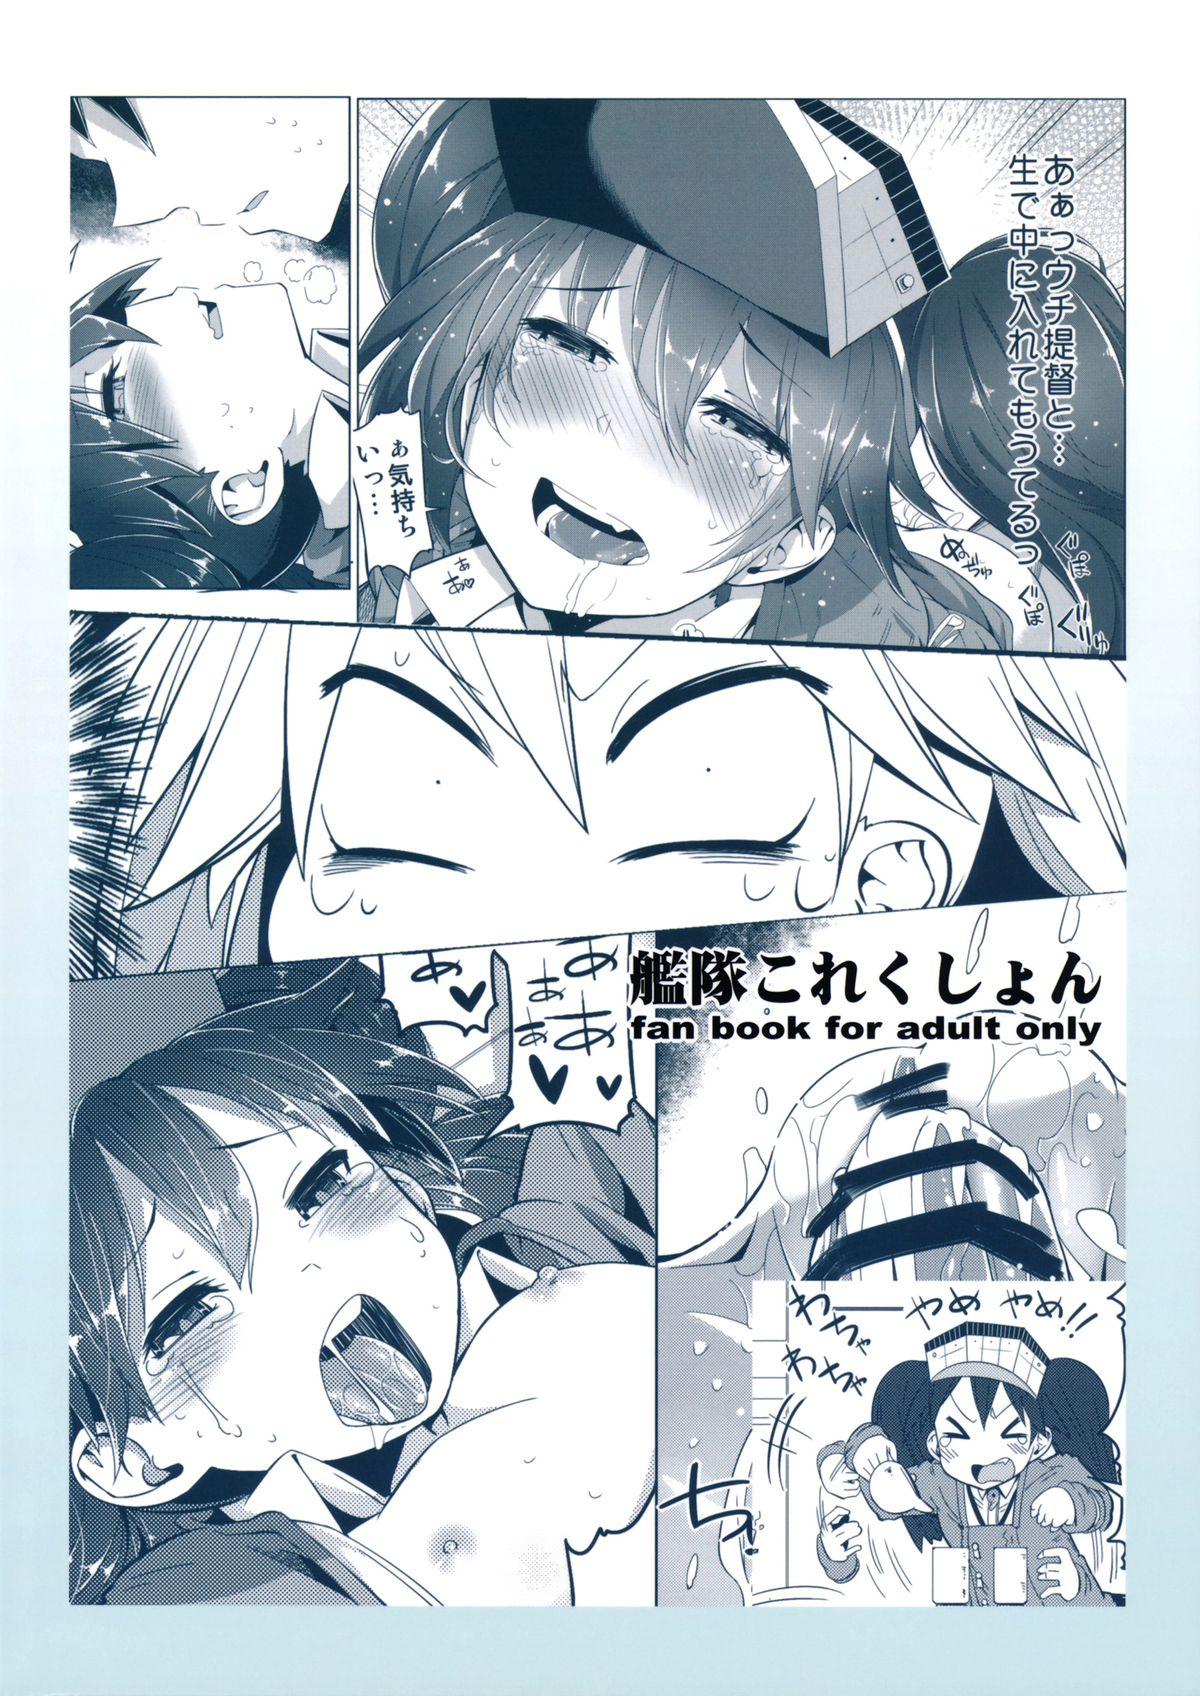 Gaysex Koi suru Otome no Miryoku wa Mune dake janai! | The Allure of a Maiden in Love isn't Only in Her Chest! - Kantai collection Students - Page 22